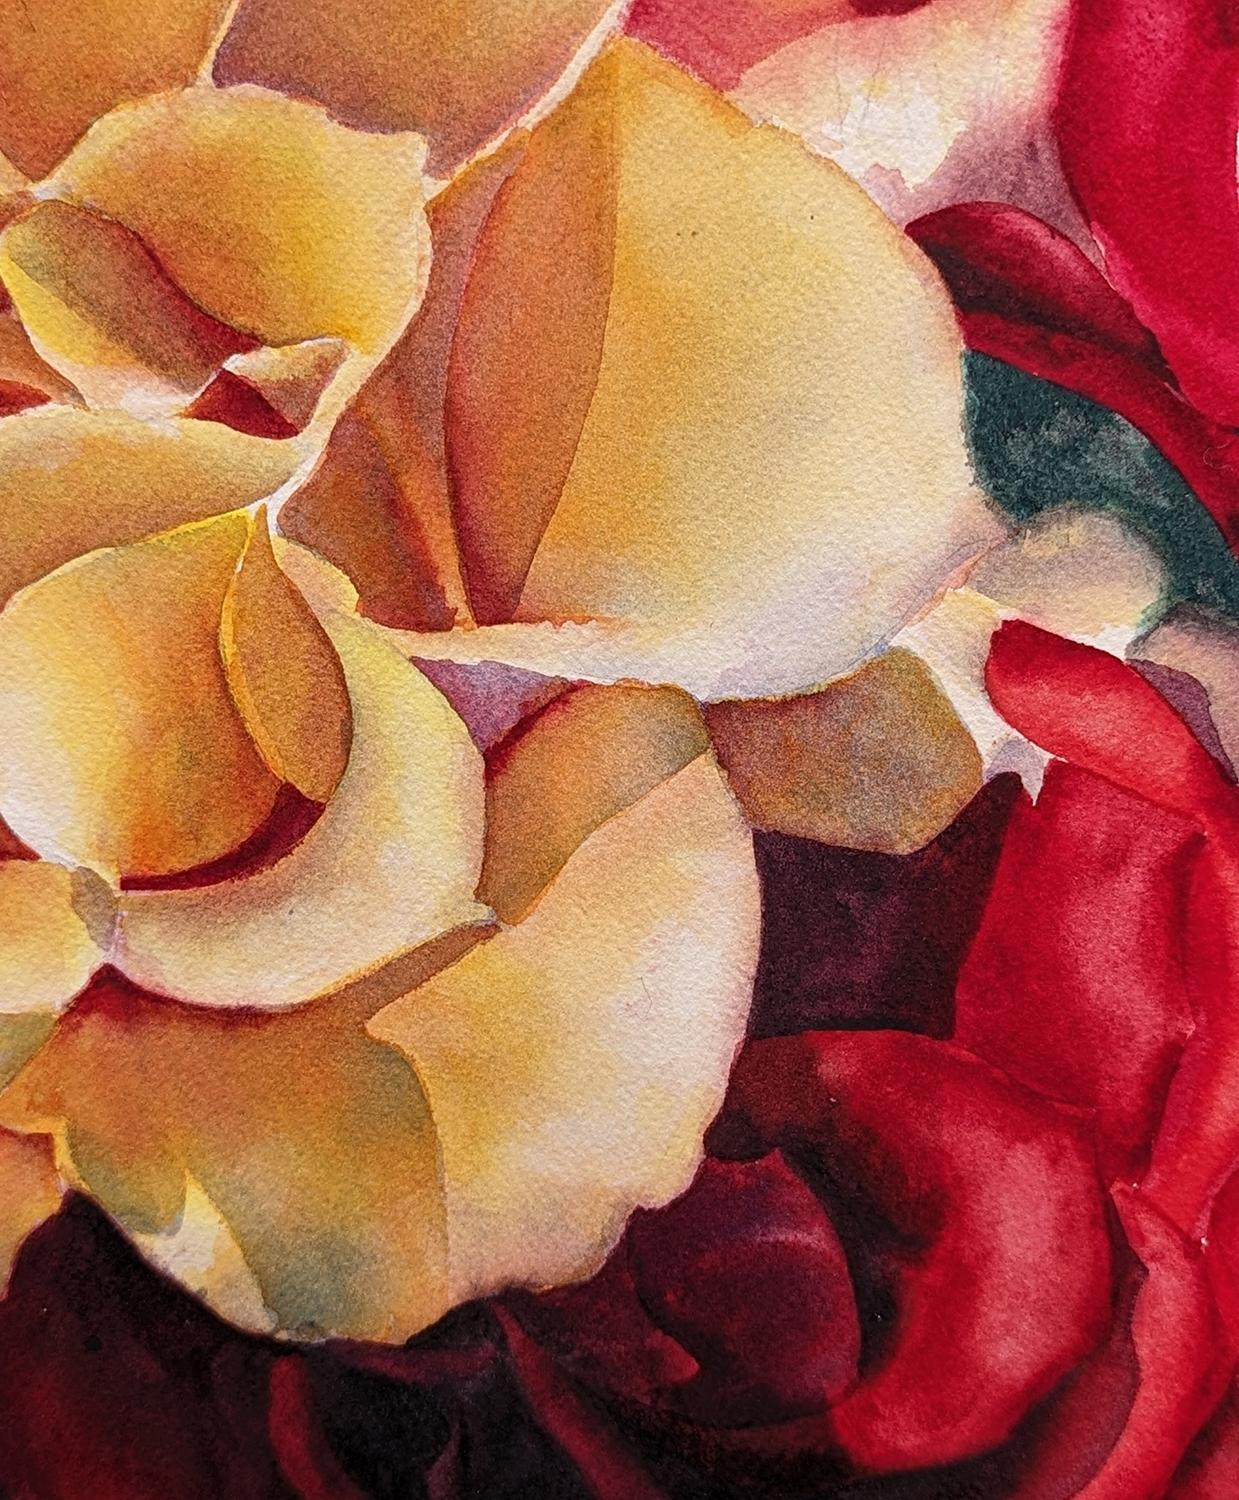 <p>Artist Comments<br>Artist Jinny Tomozy presents a bouquet of red and yellow roses in realistic detail. 